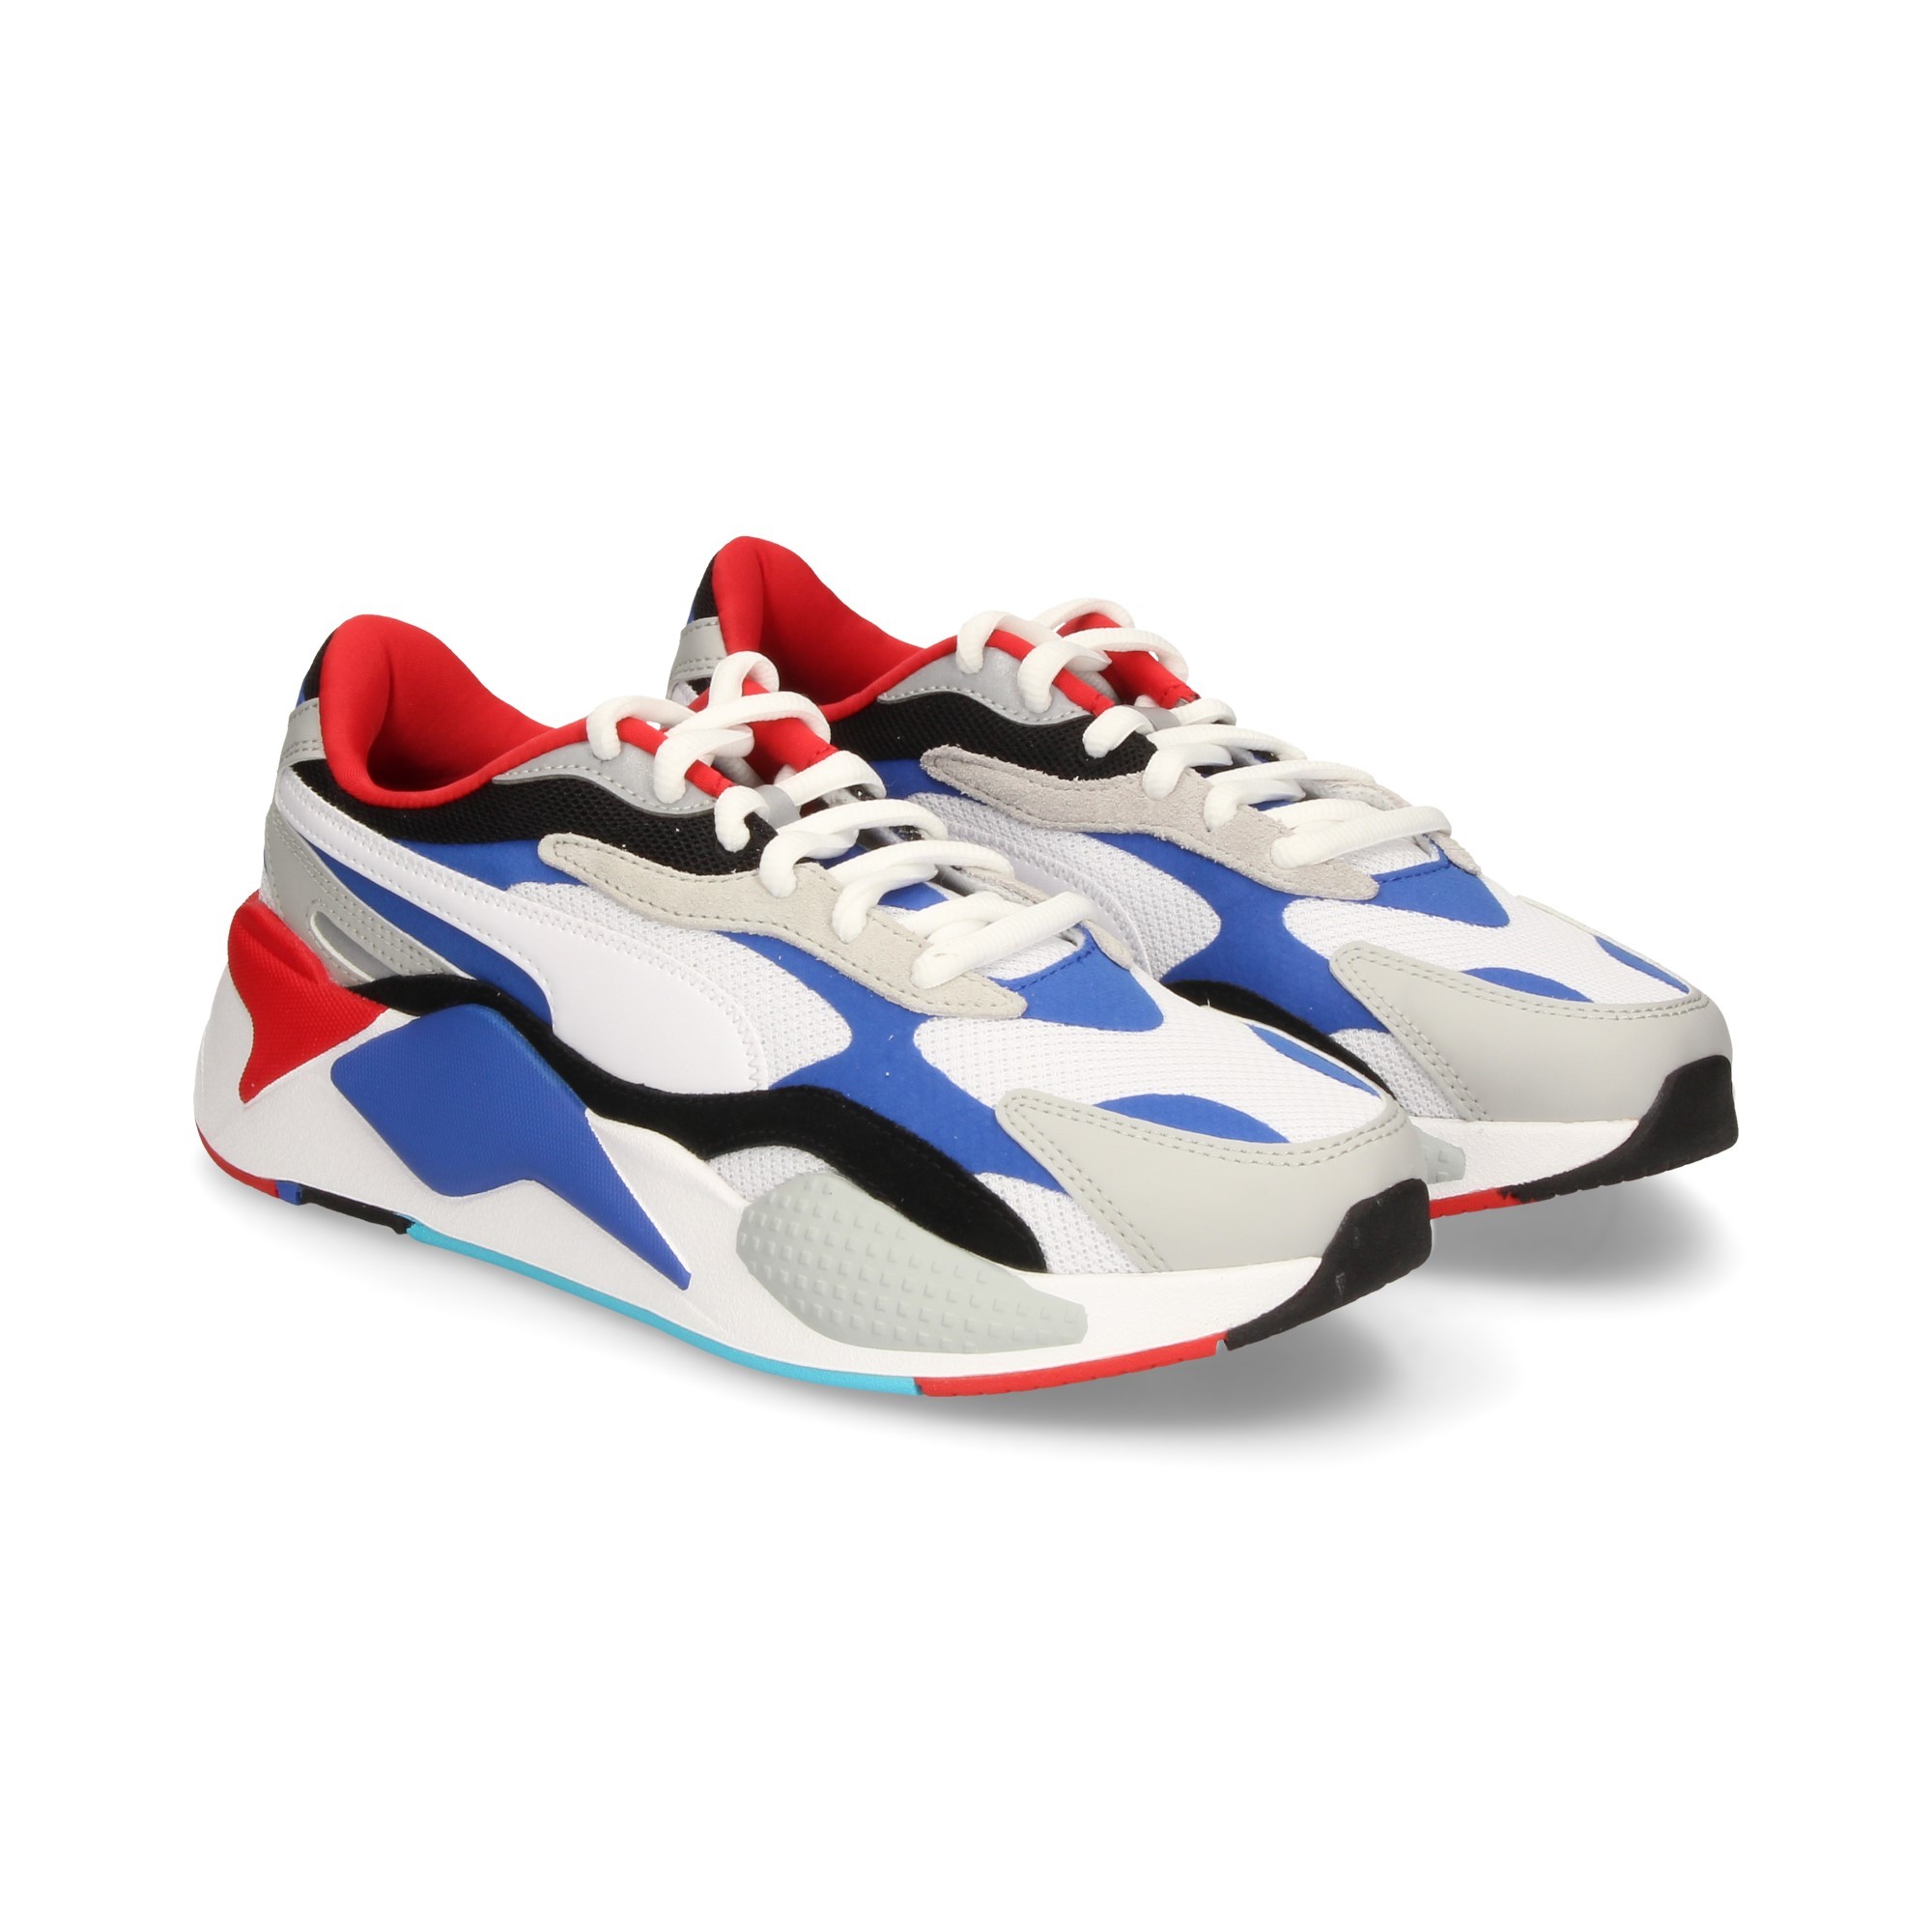 sporty-mesh-puzzle-weiss-blau-rot